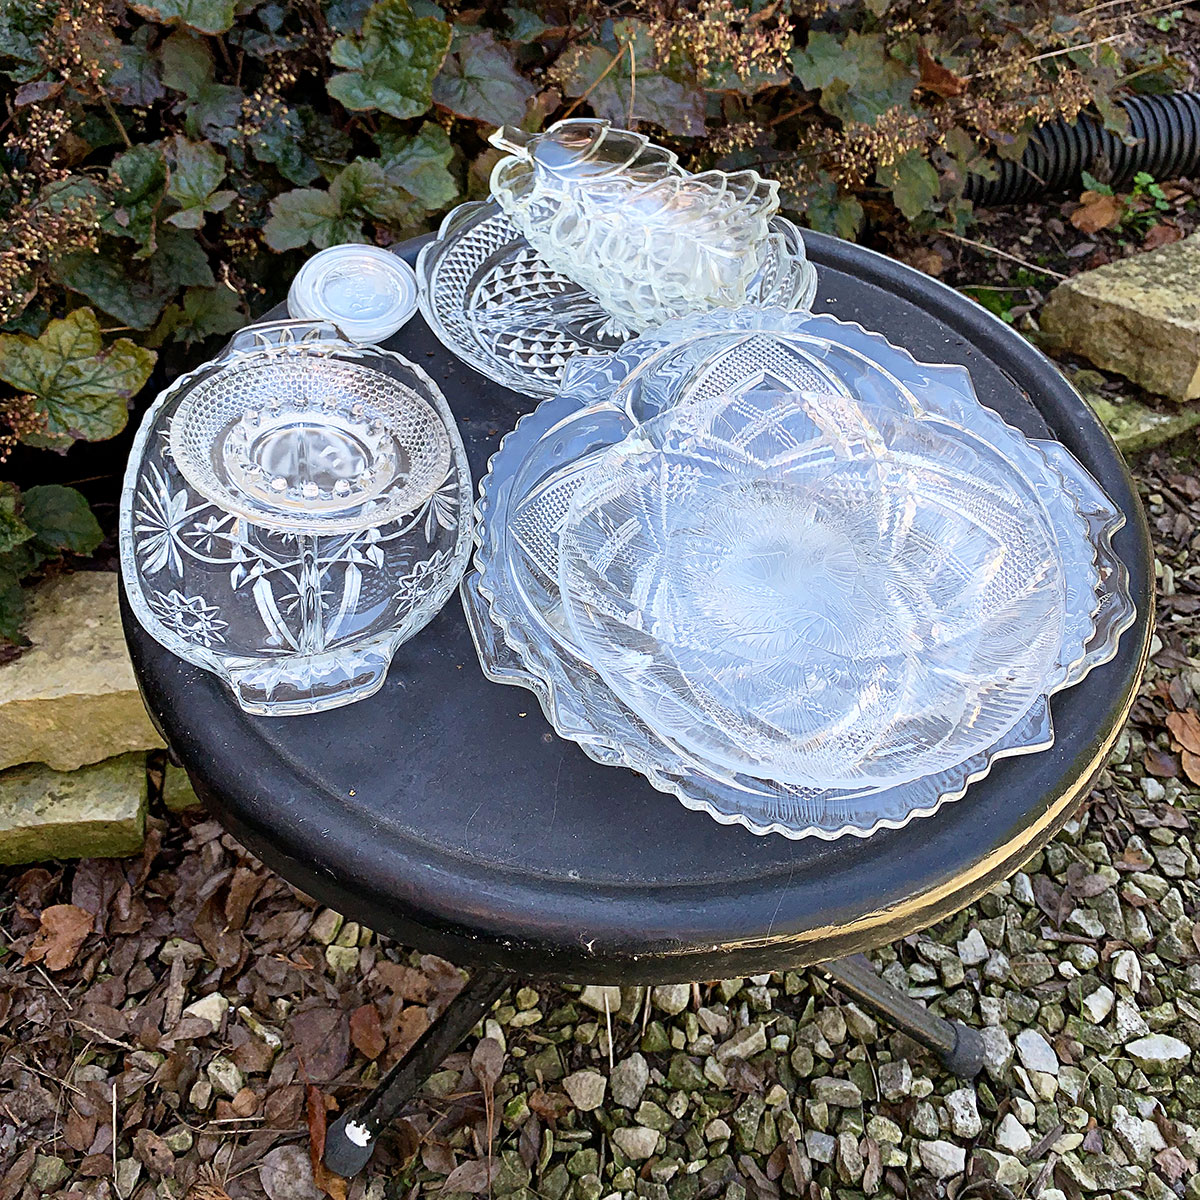 Pressed glass plates and bowls from the thrift store.